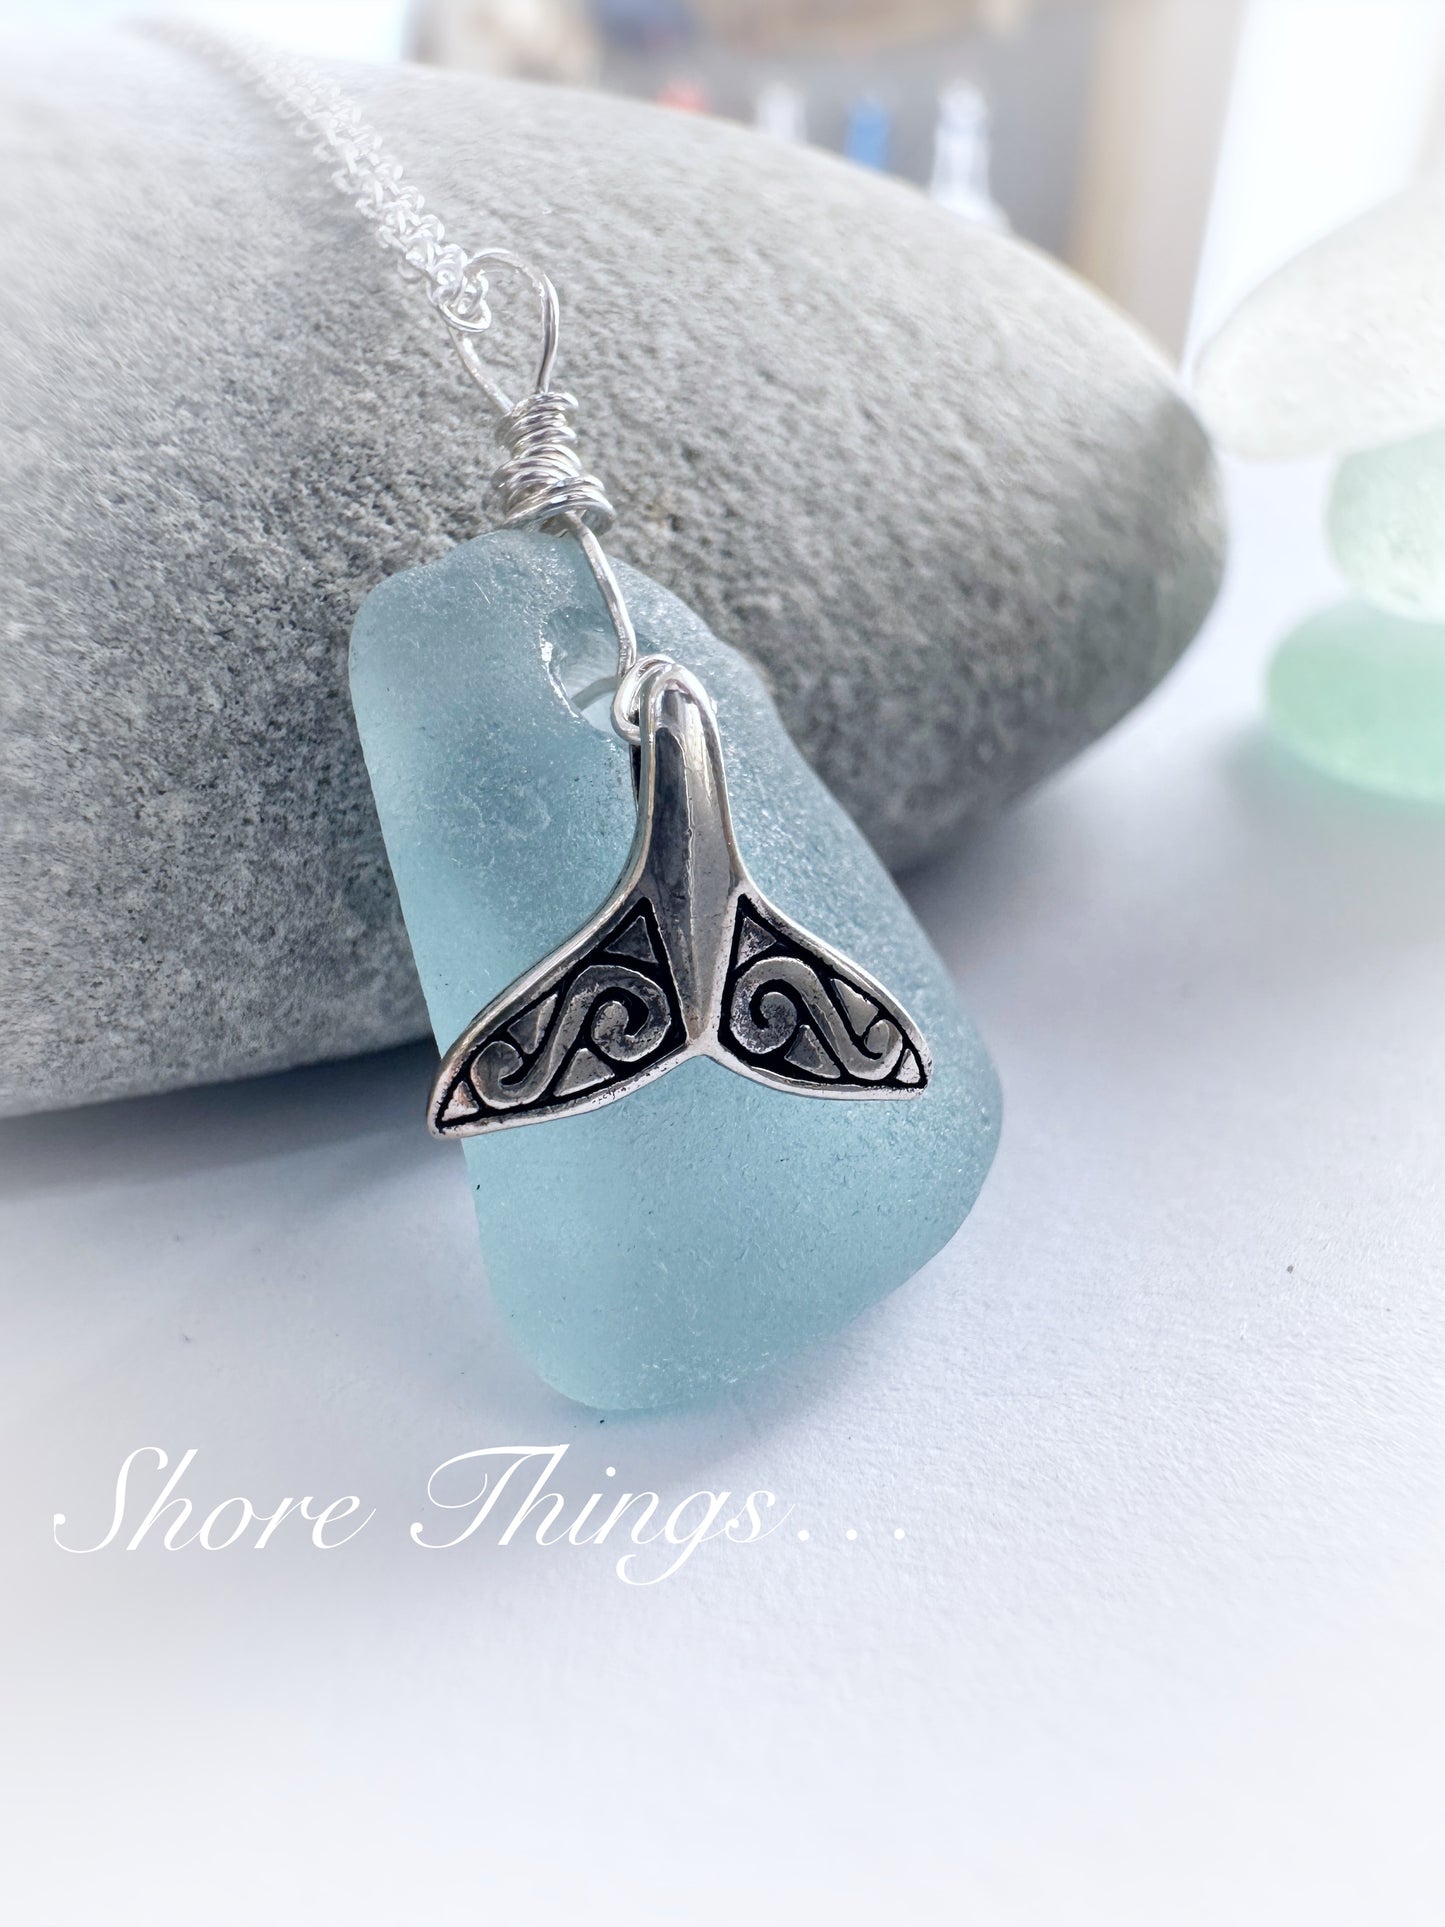 Sea Glass .925 Silver Charm necklace - mermaid tail